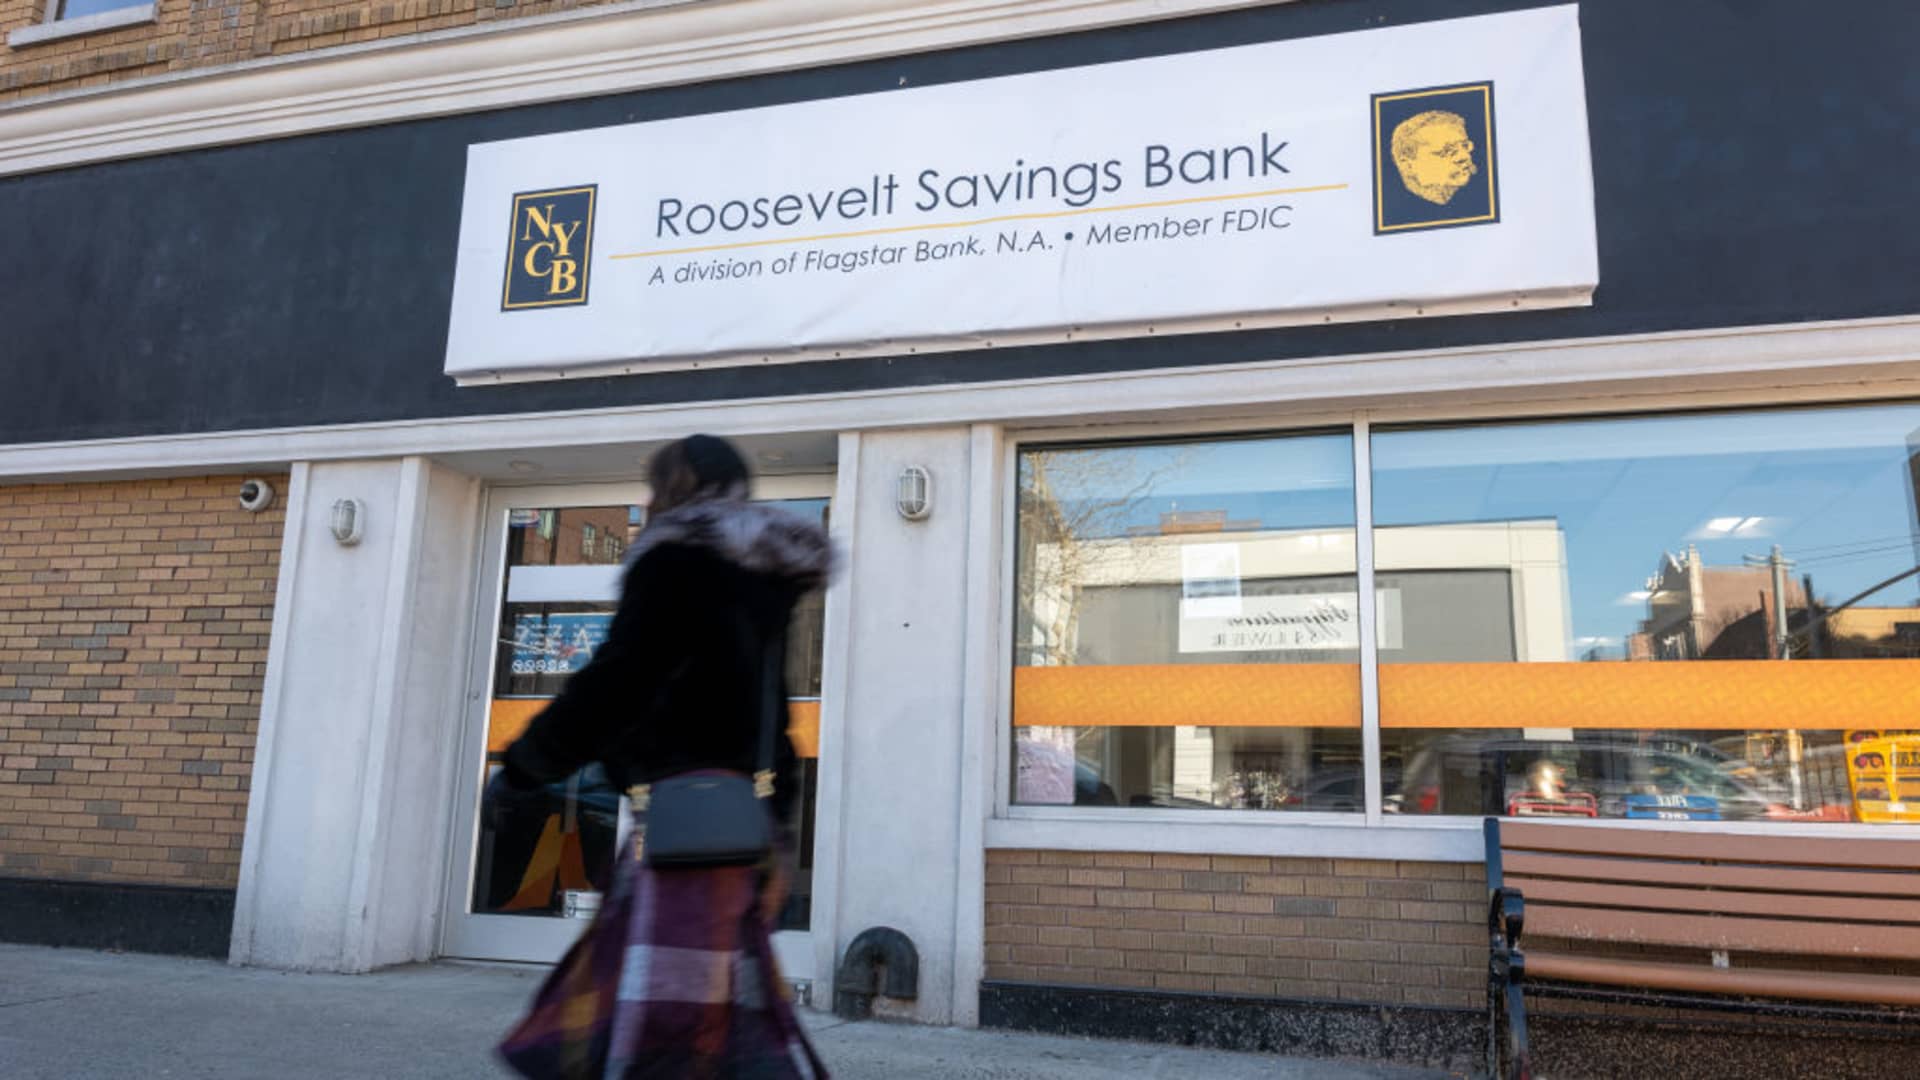 New York Community Bank’s online arm is paying the nation’s highest interest rate